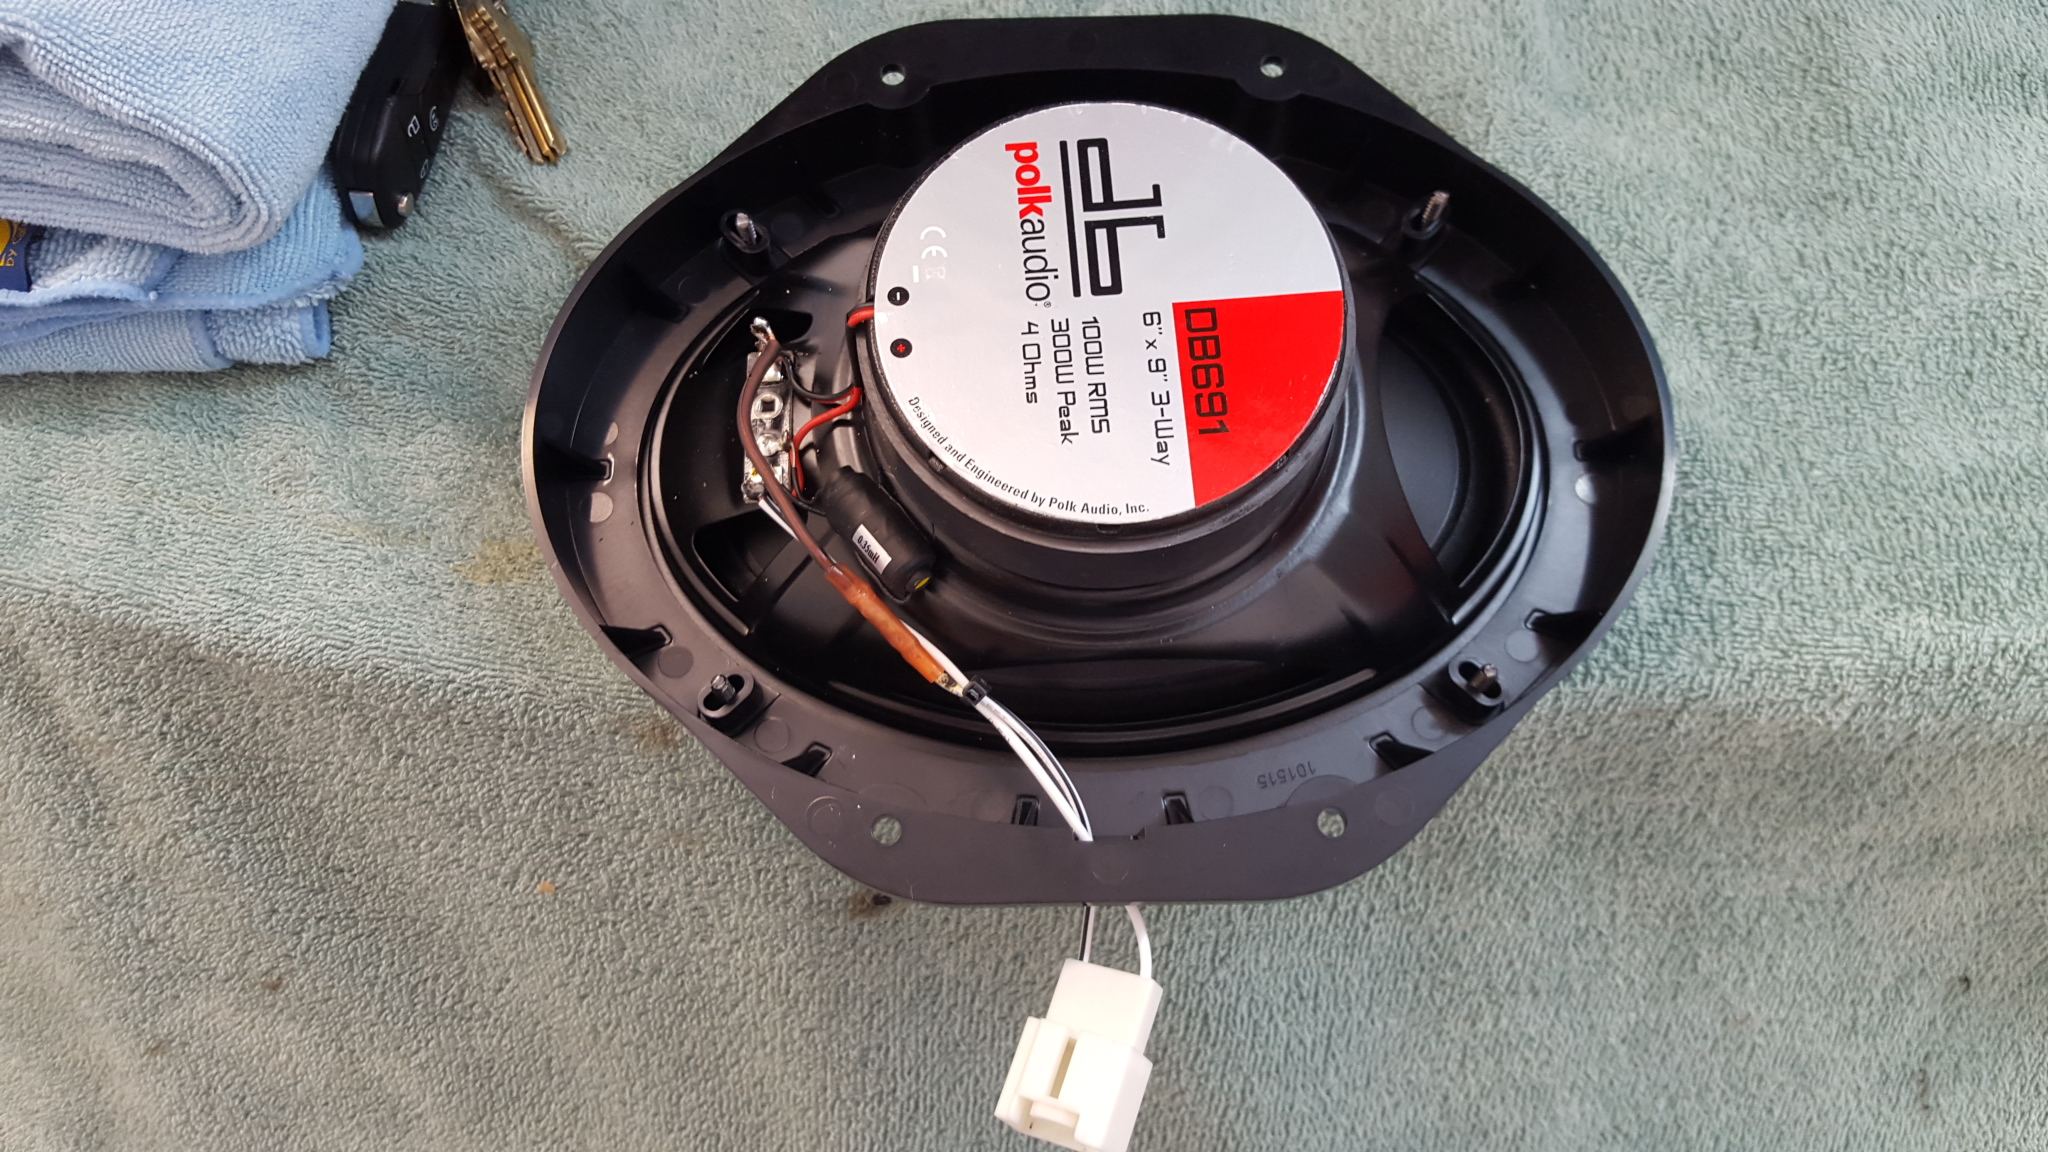 Metra Speaker & Harness Adapters - Ford F150 Forum - Community of